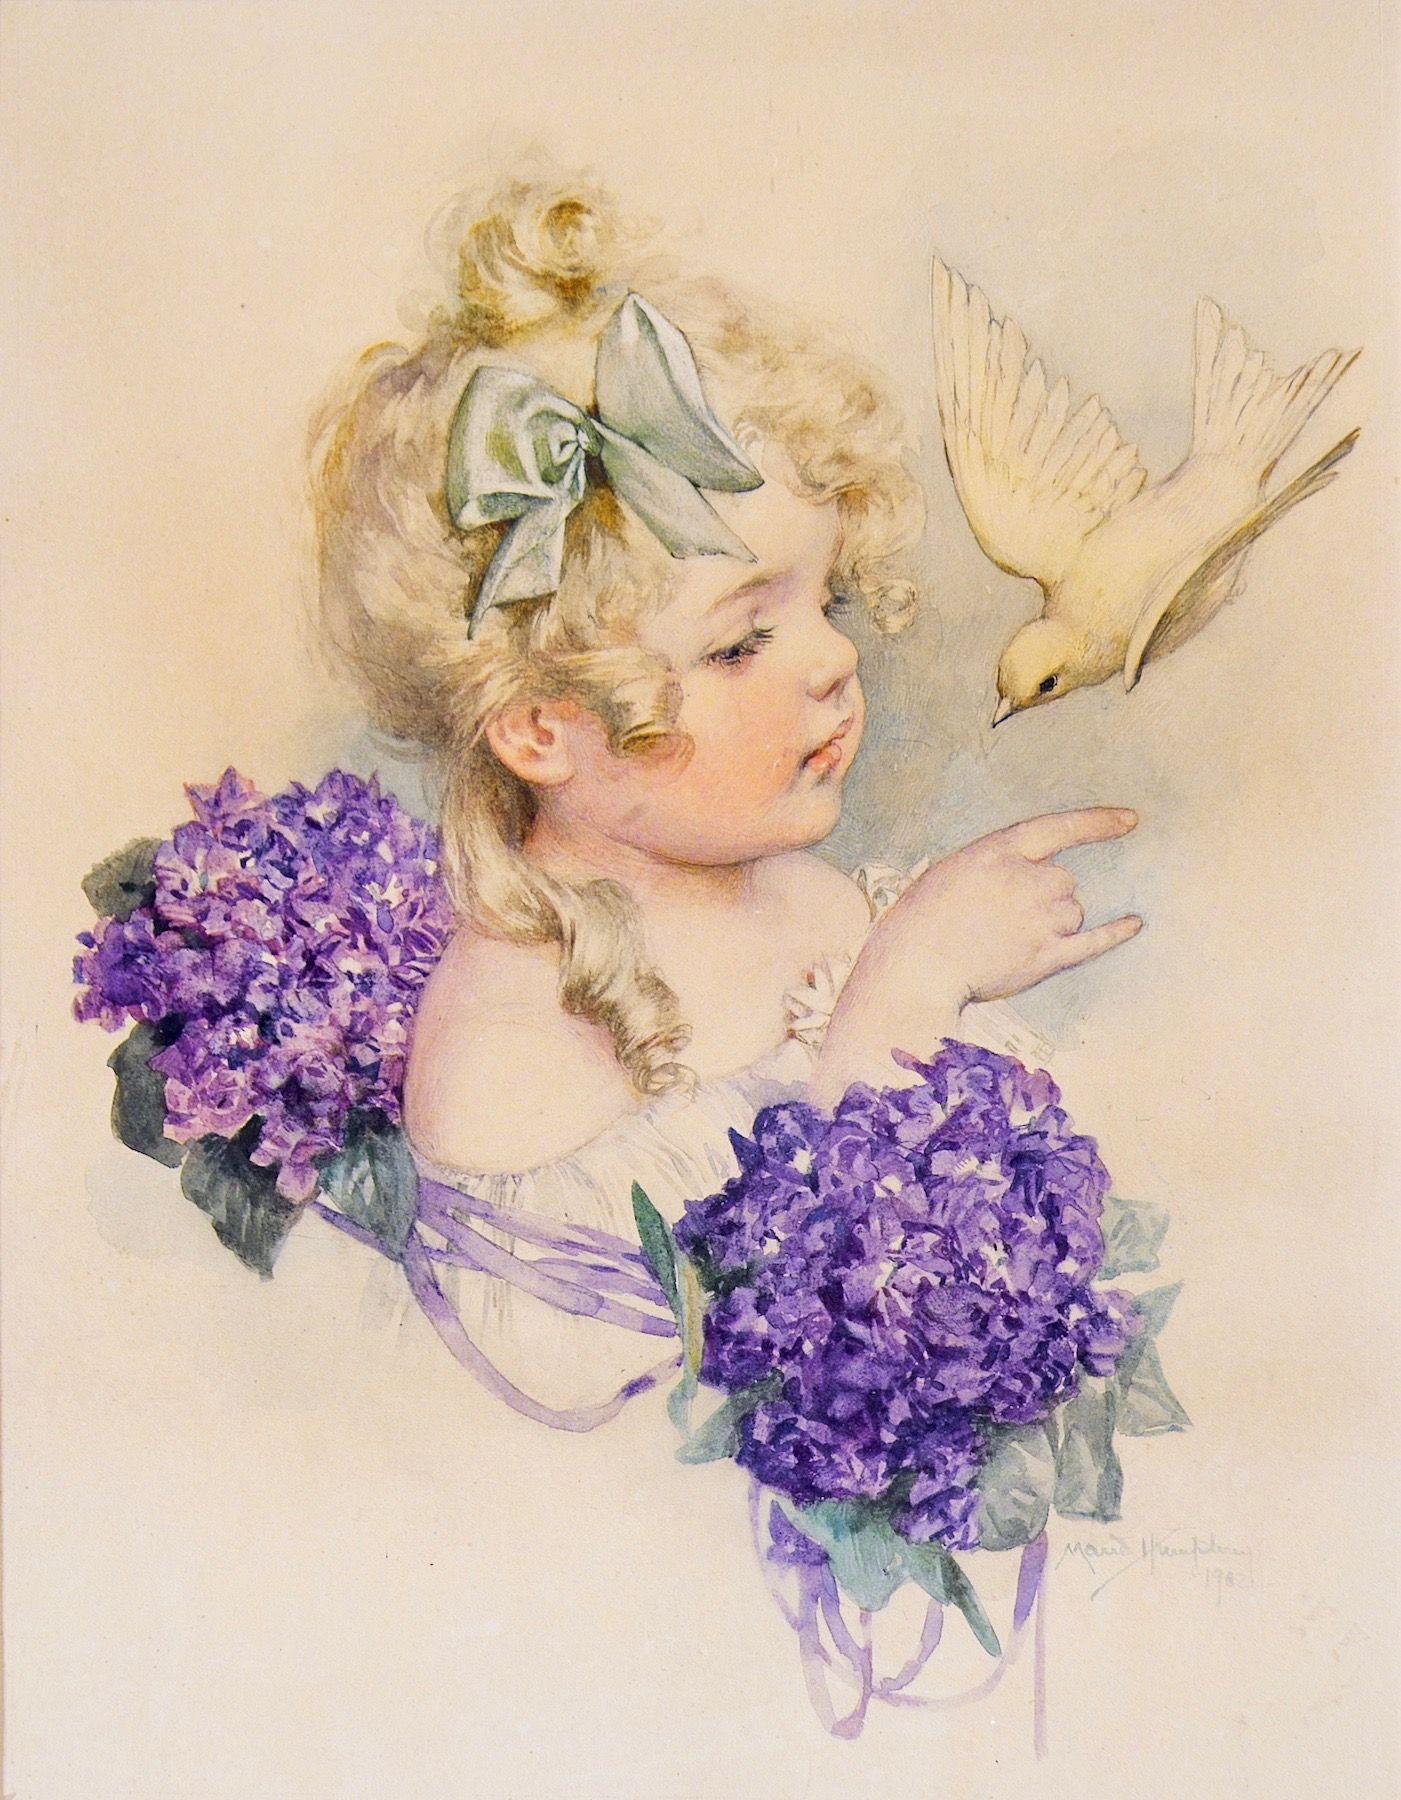 Maud Humphrey Portrait - Girl with Bird and Violets